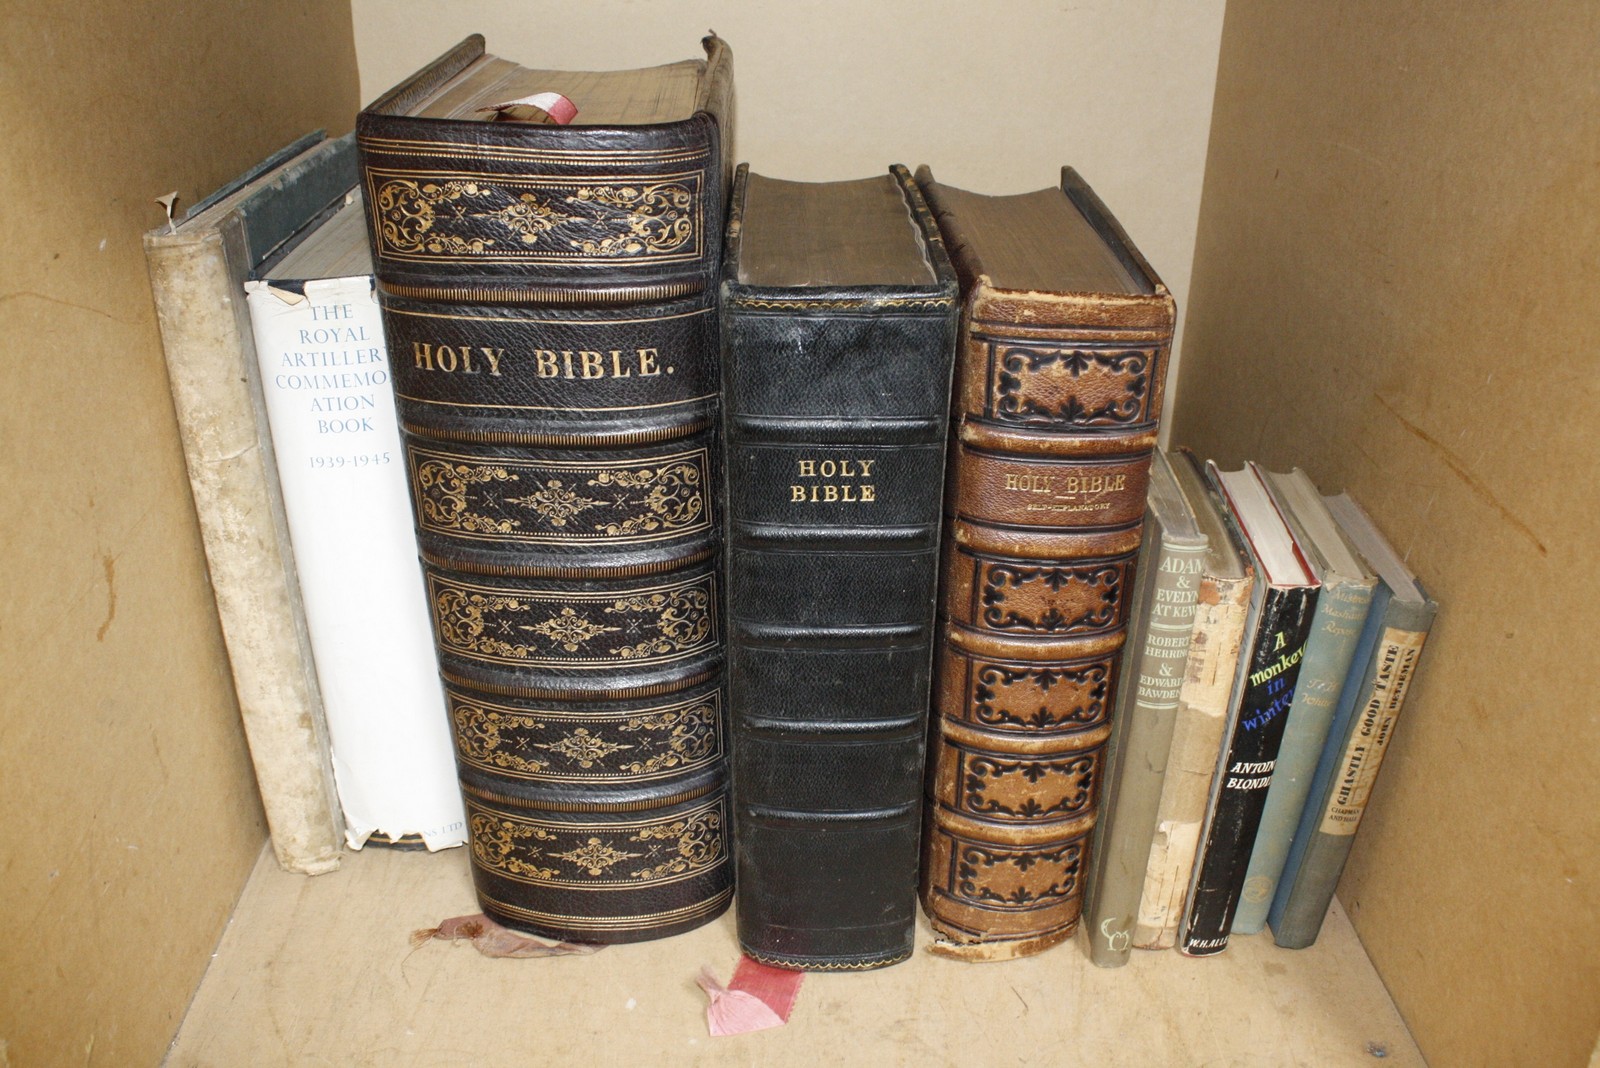 Various books to include three 'Holy Bible's', 'The Royal Artillery Commemoration Book 1939 - 1945',